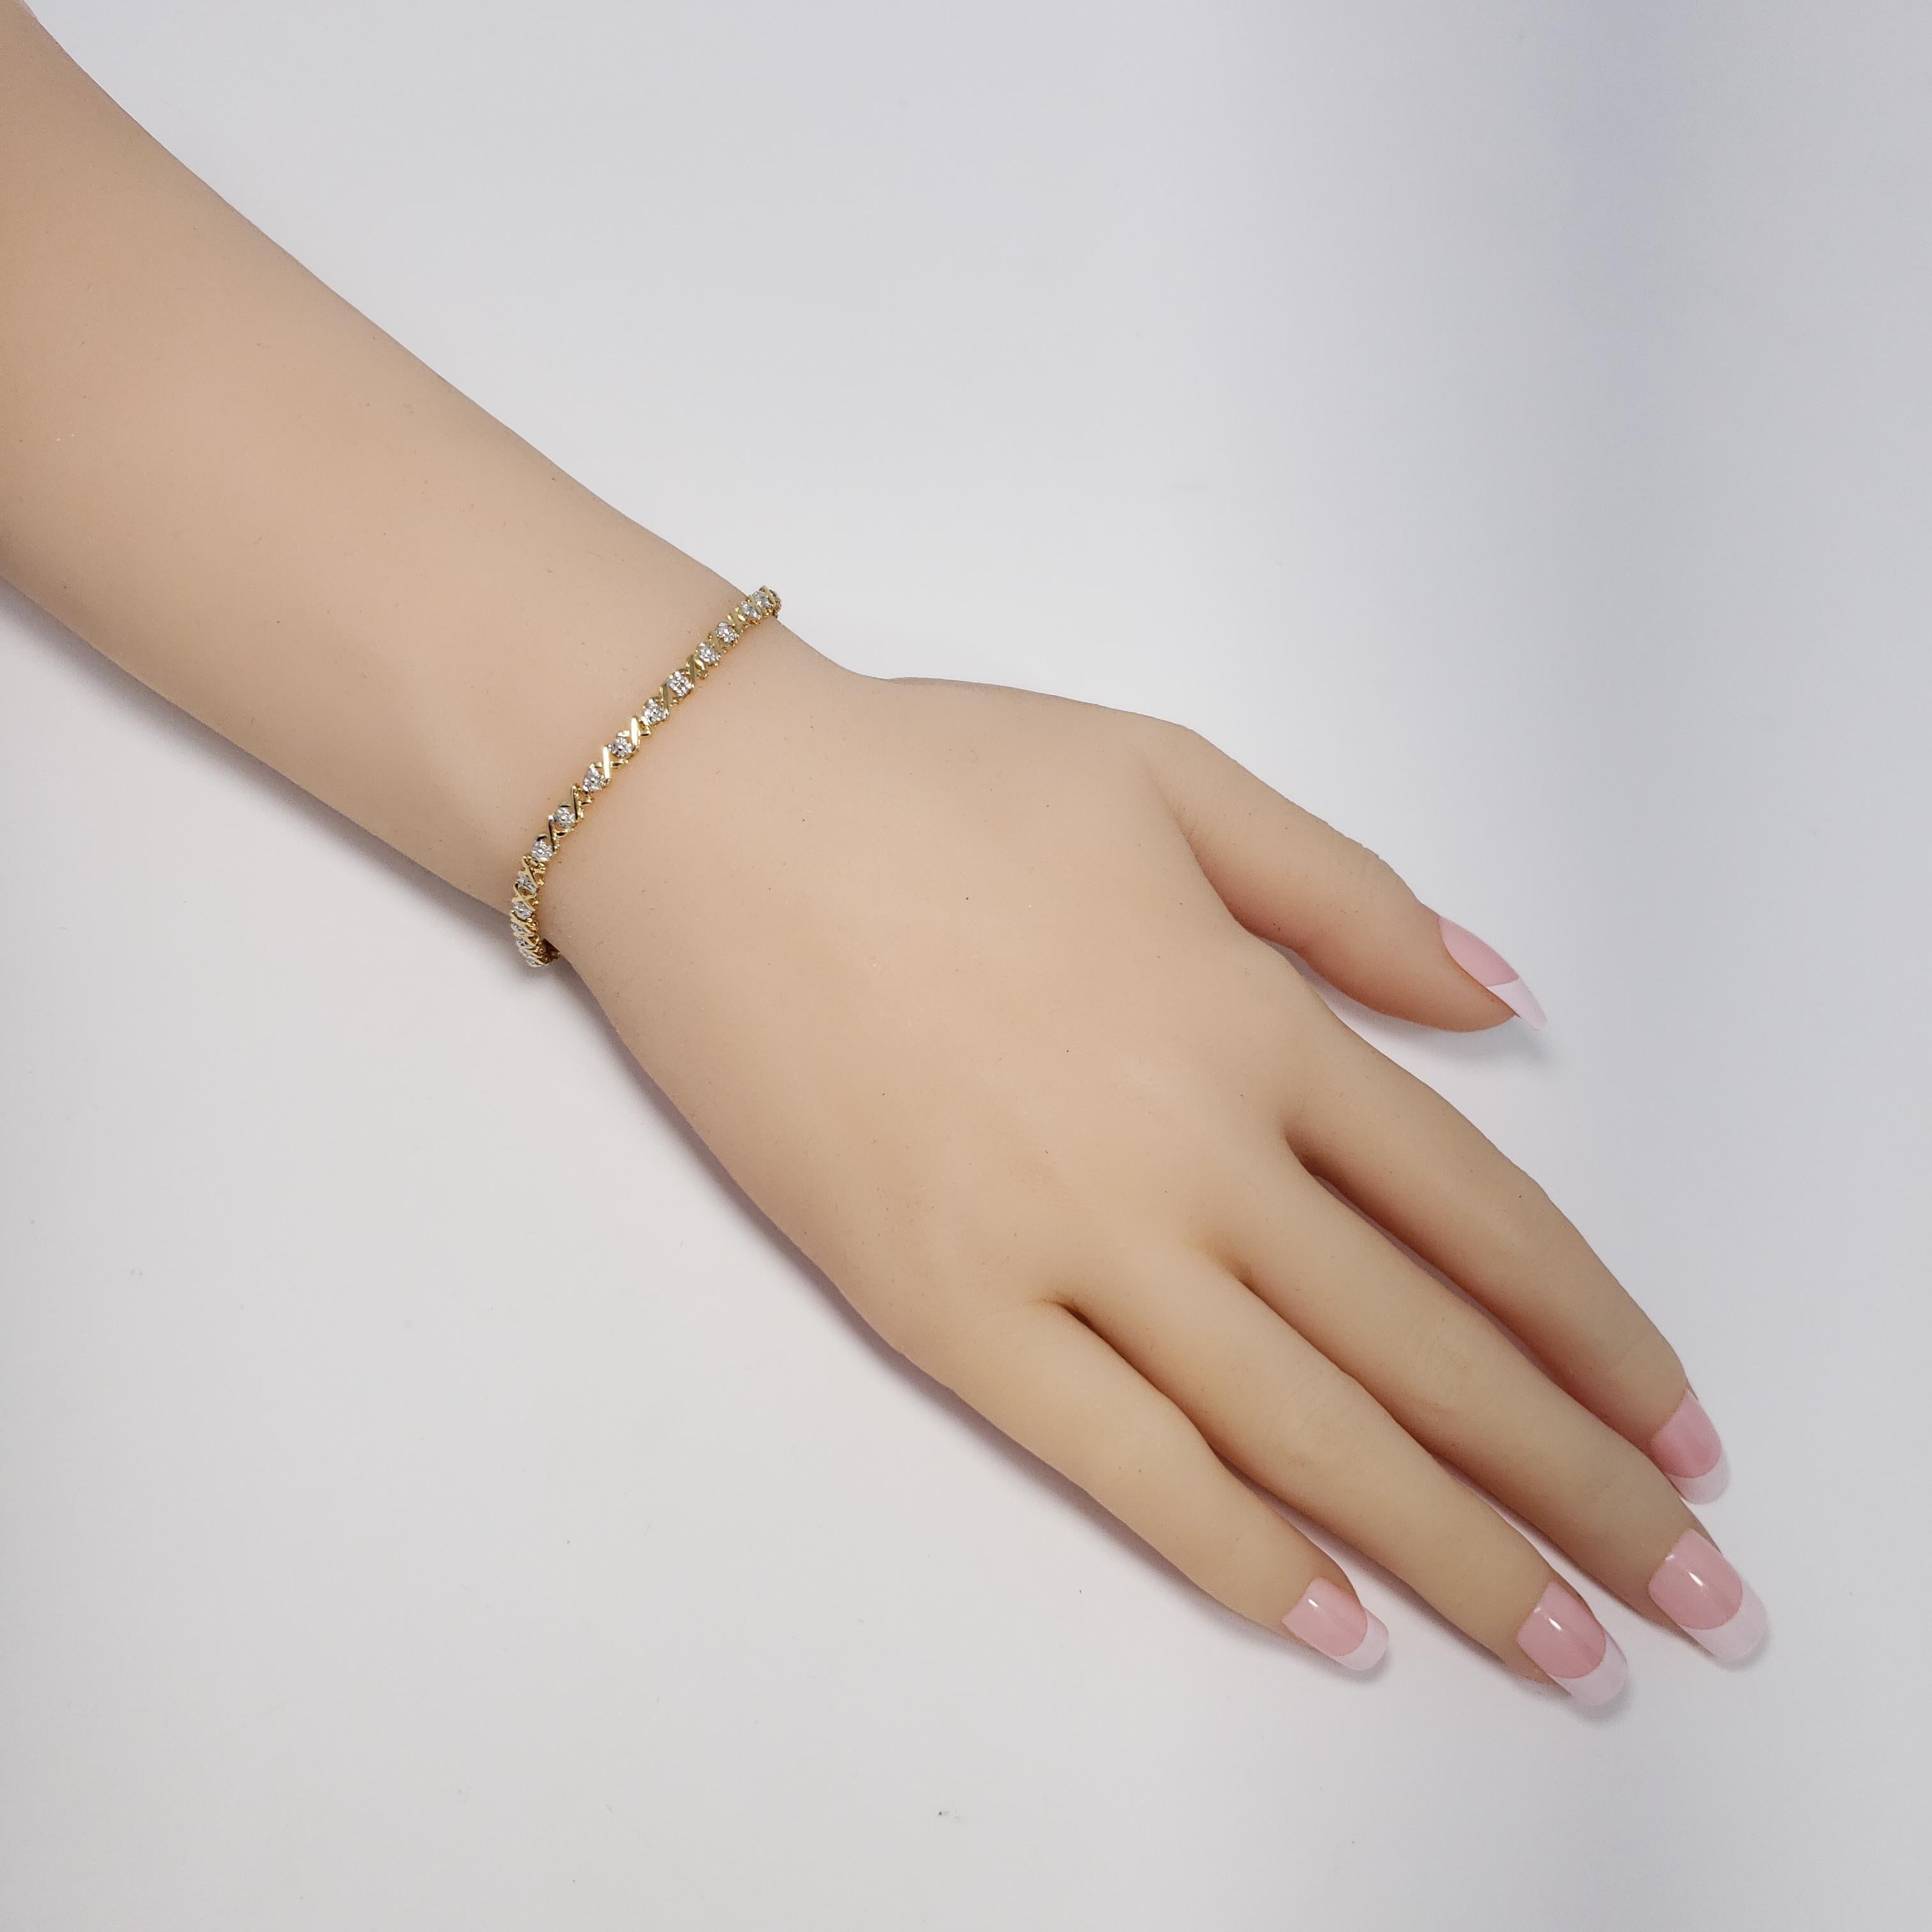 A bracelet featuring white and yellow 14K gold links, accented with open back diamonds.

The toggle clasp does not click when inserted, but the snap fastener allows for secure closure.

Length: 17.5cm